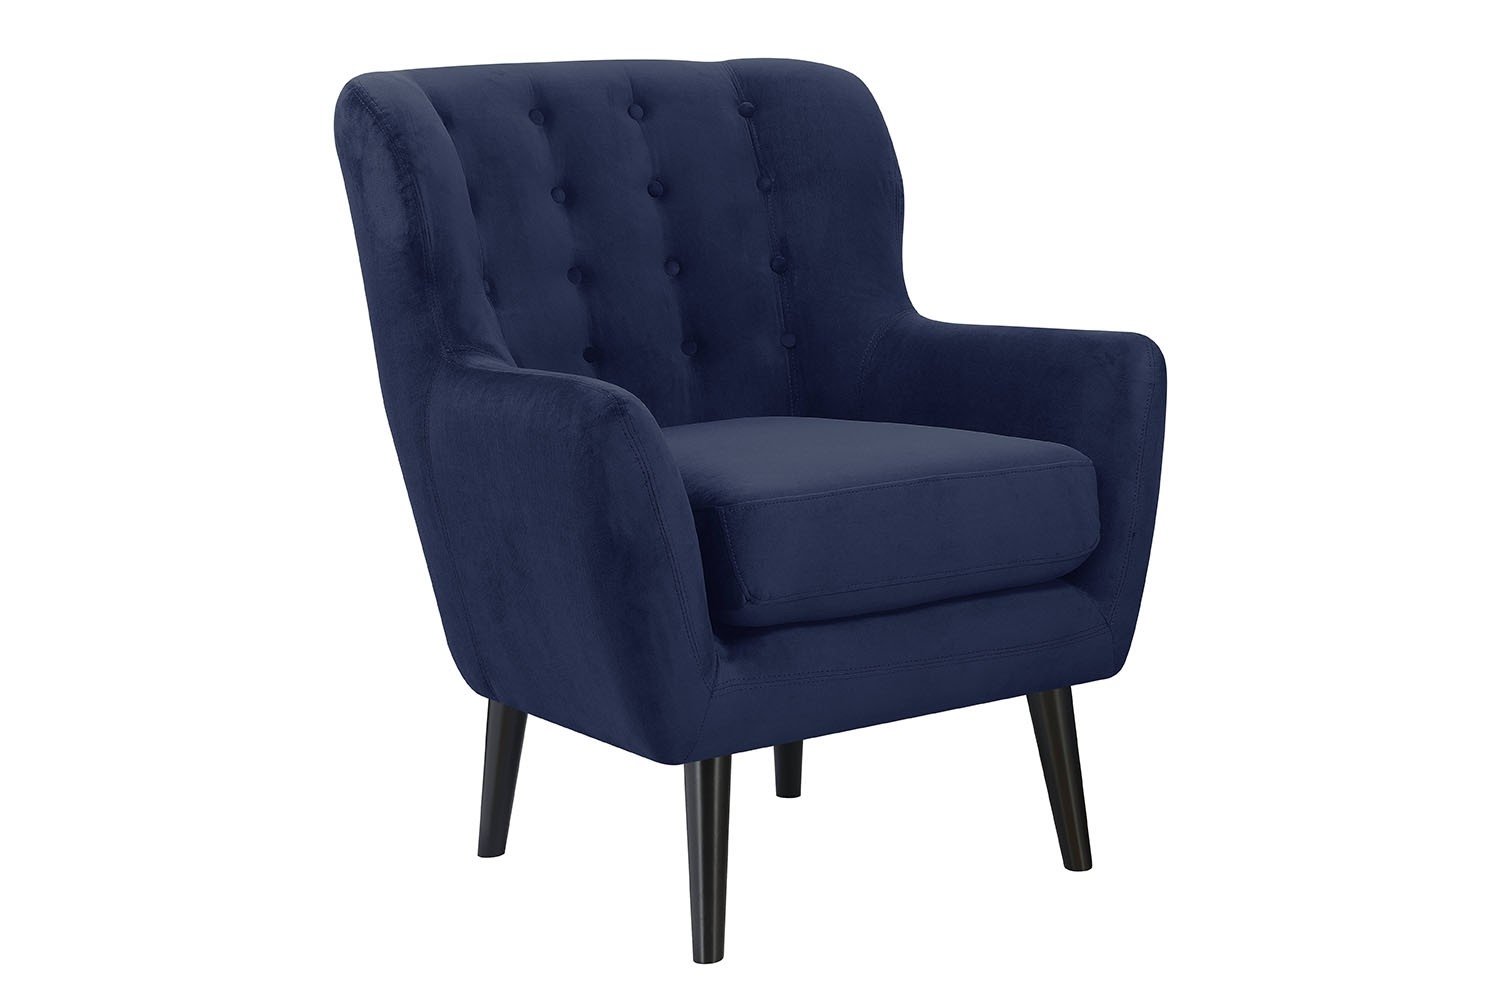 accent chairs mor furniture for less lucy navy piece chair and table set round white wicker glass couch pier one sofa pieces family room mid century dining end tables with storage